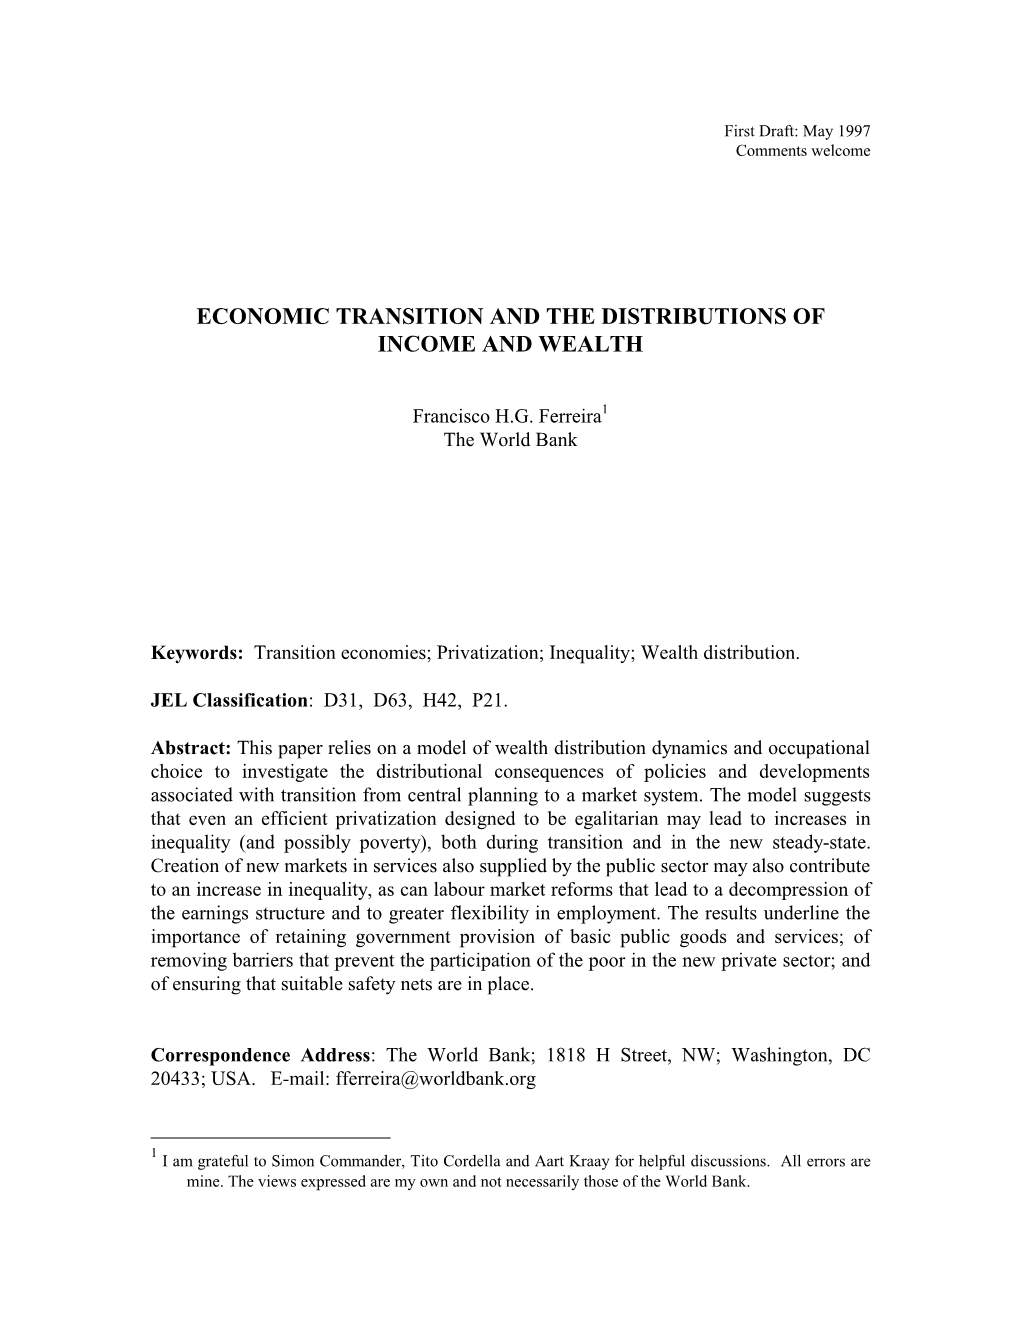 Economic Transition and the Distributions of Income and Wealth